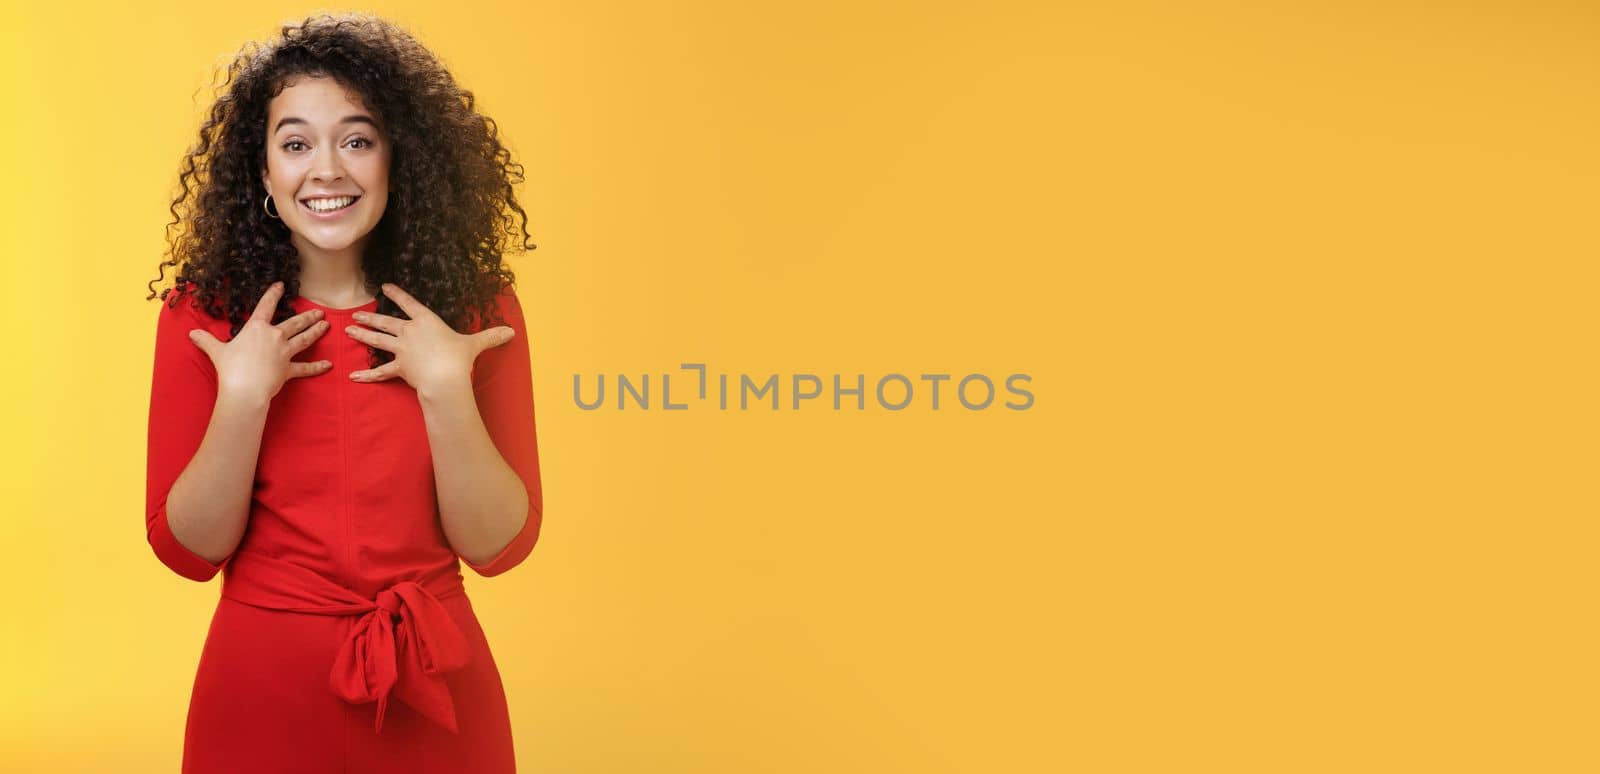 Lifestyle. Pleased and thankful tender curly-haired kind girl in red dress pressing hands to breast being surprised with unexpected tender heartwarming gift thanking smiling delighted over yellow background